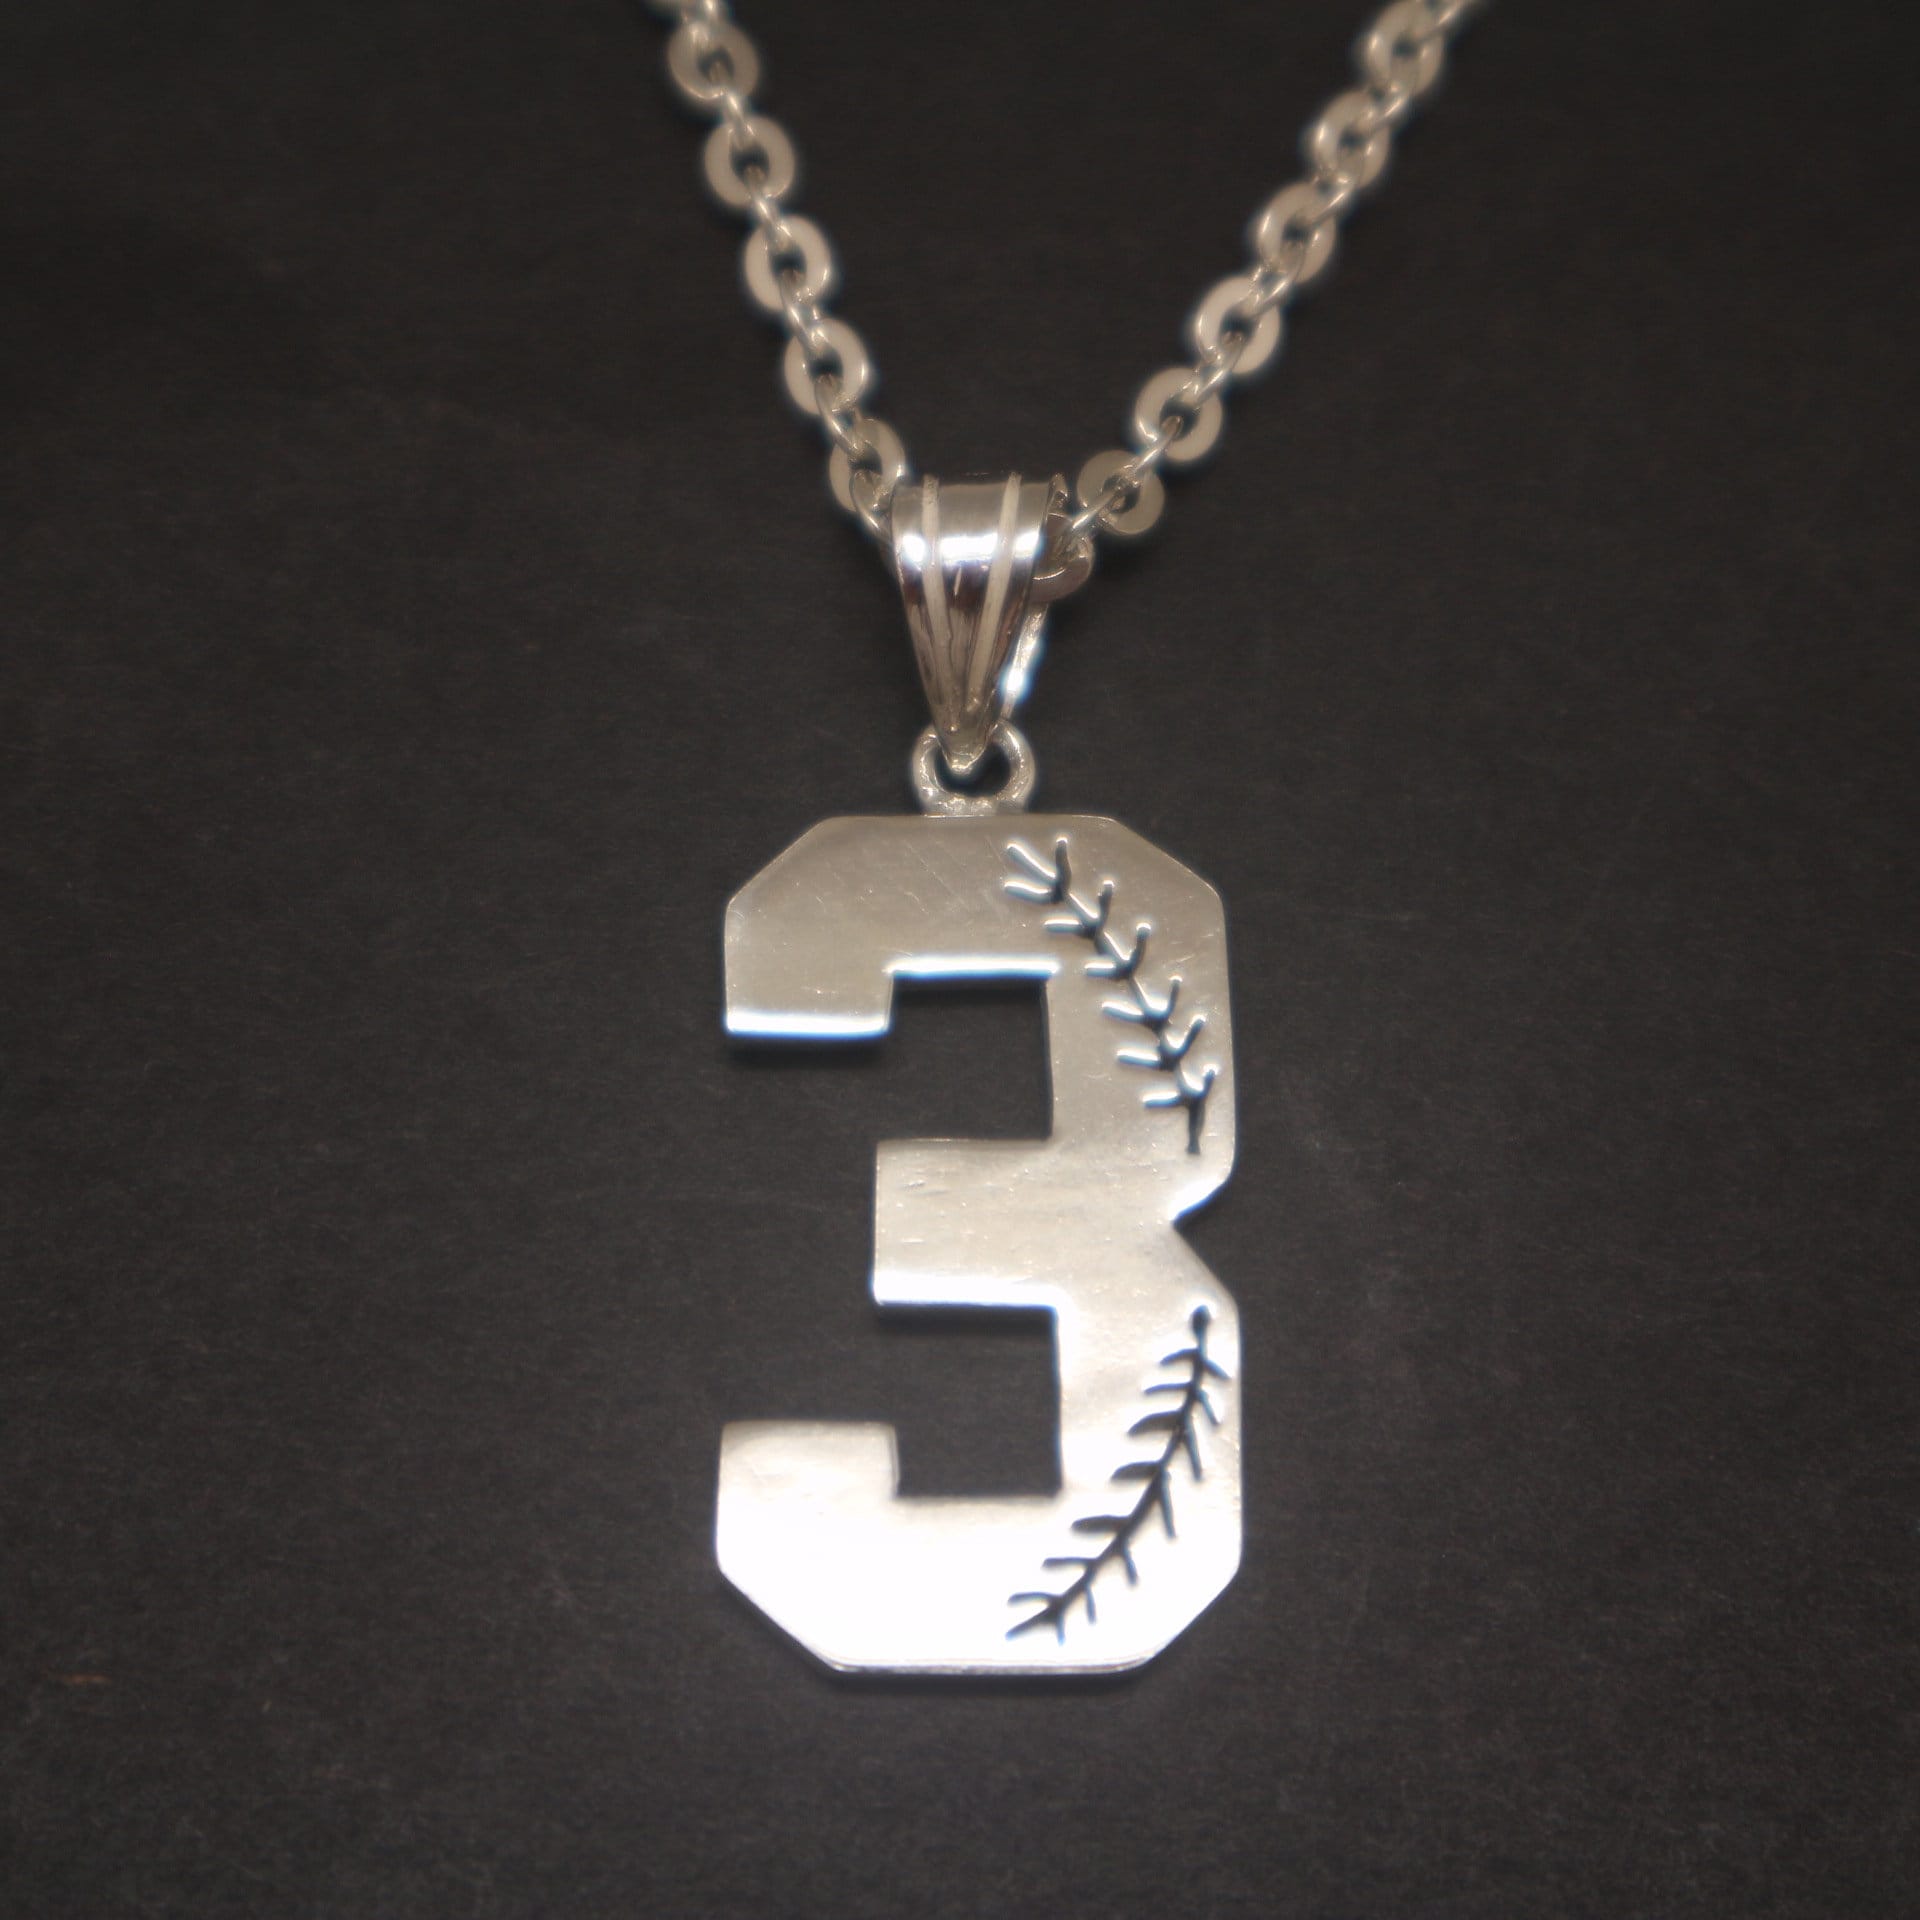 Personalized Baseball-Themed Necklace